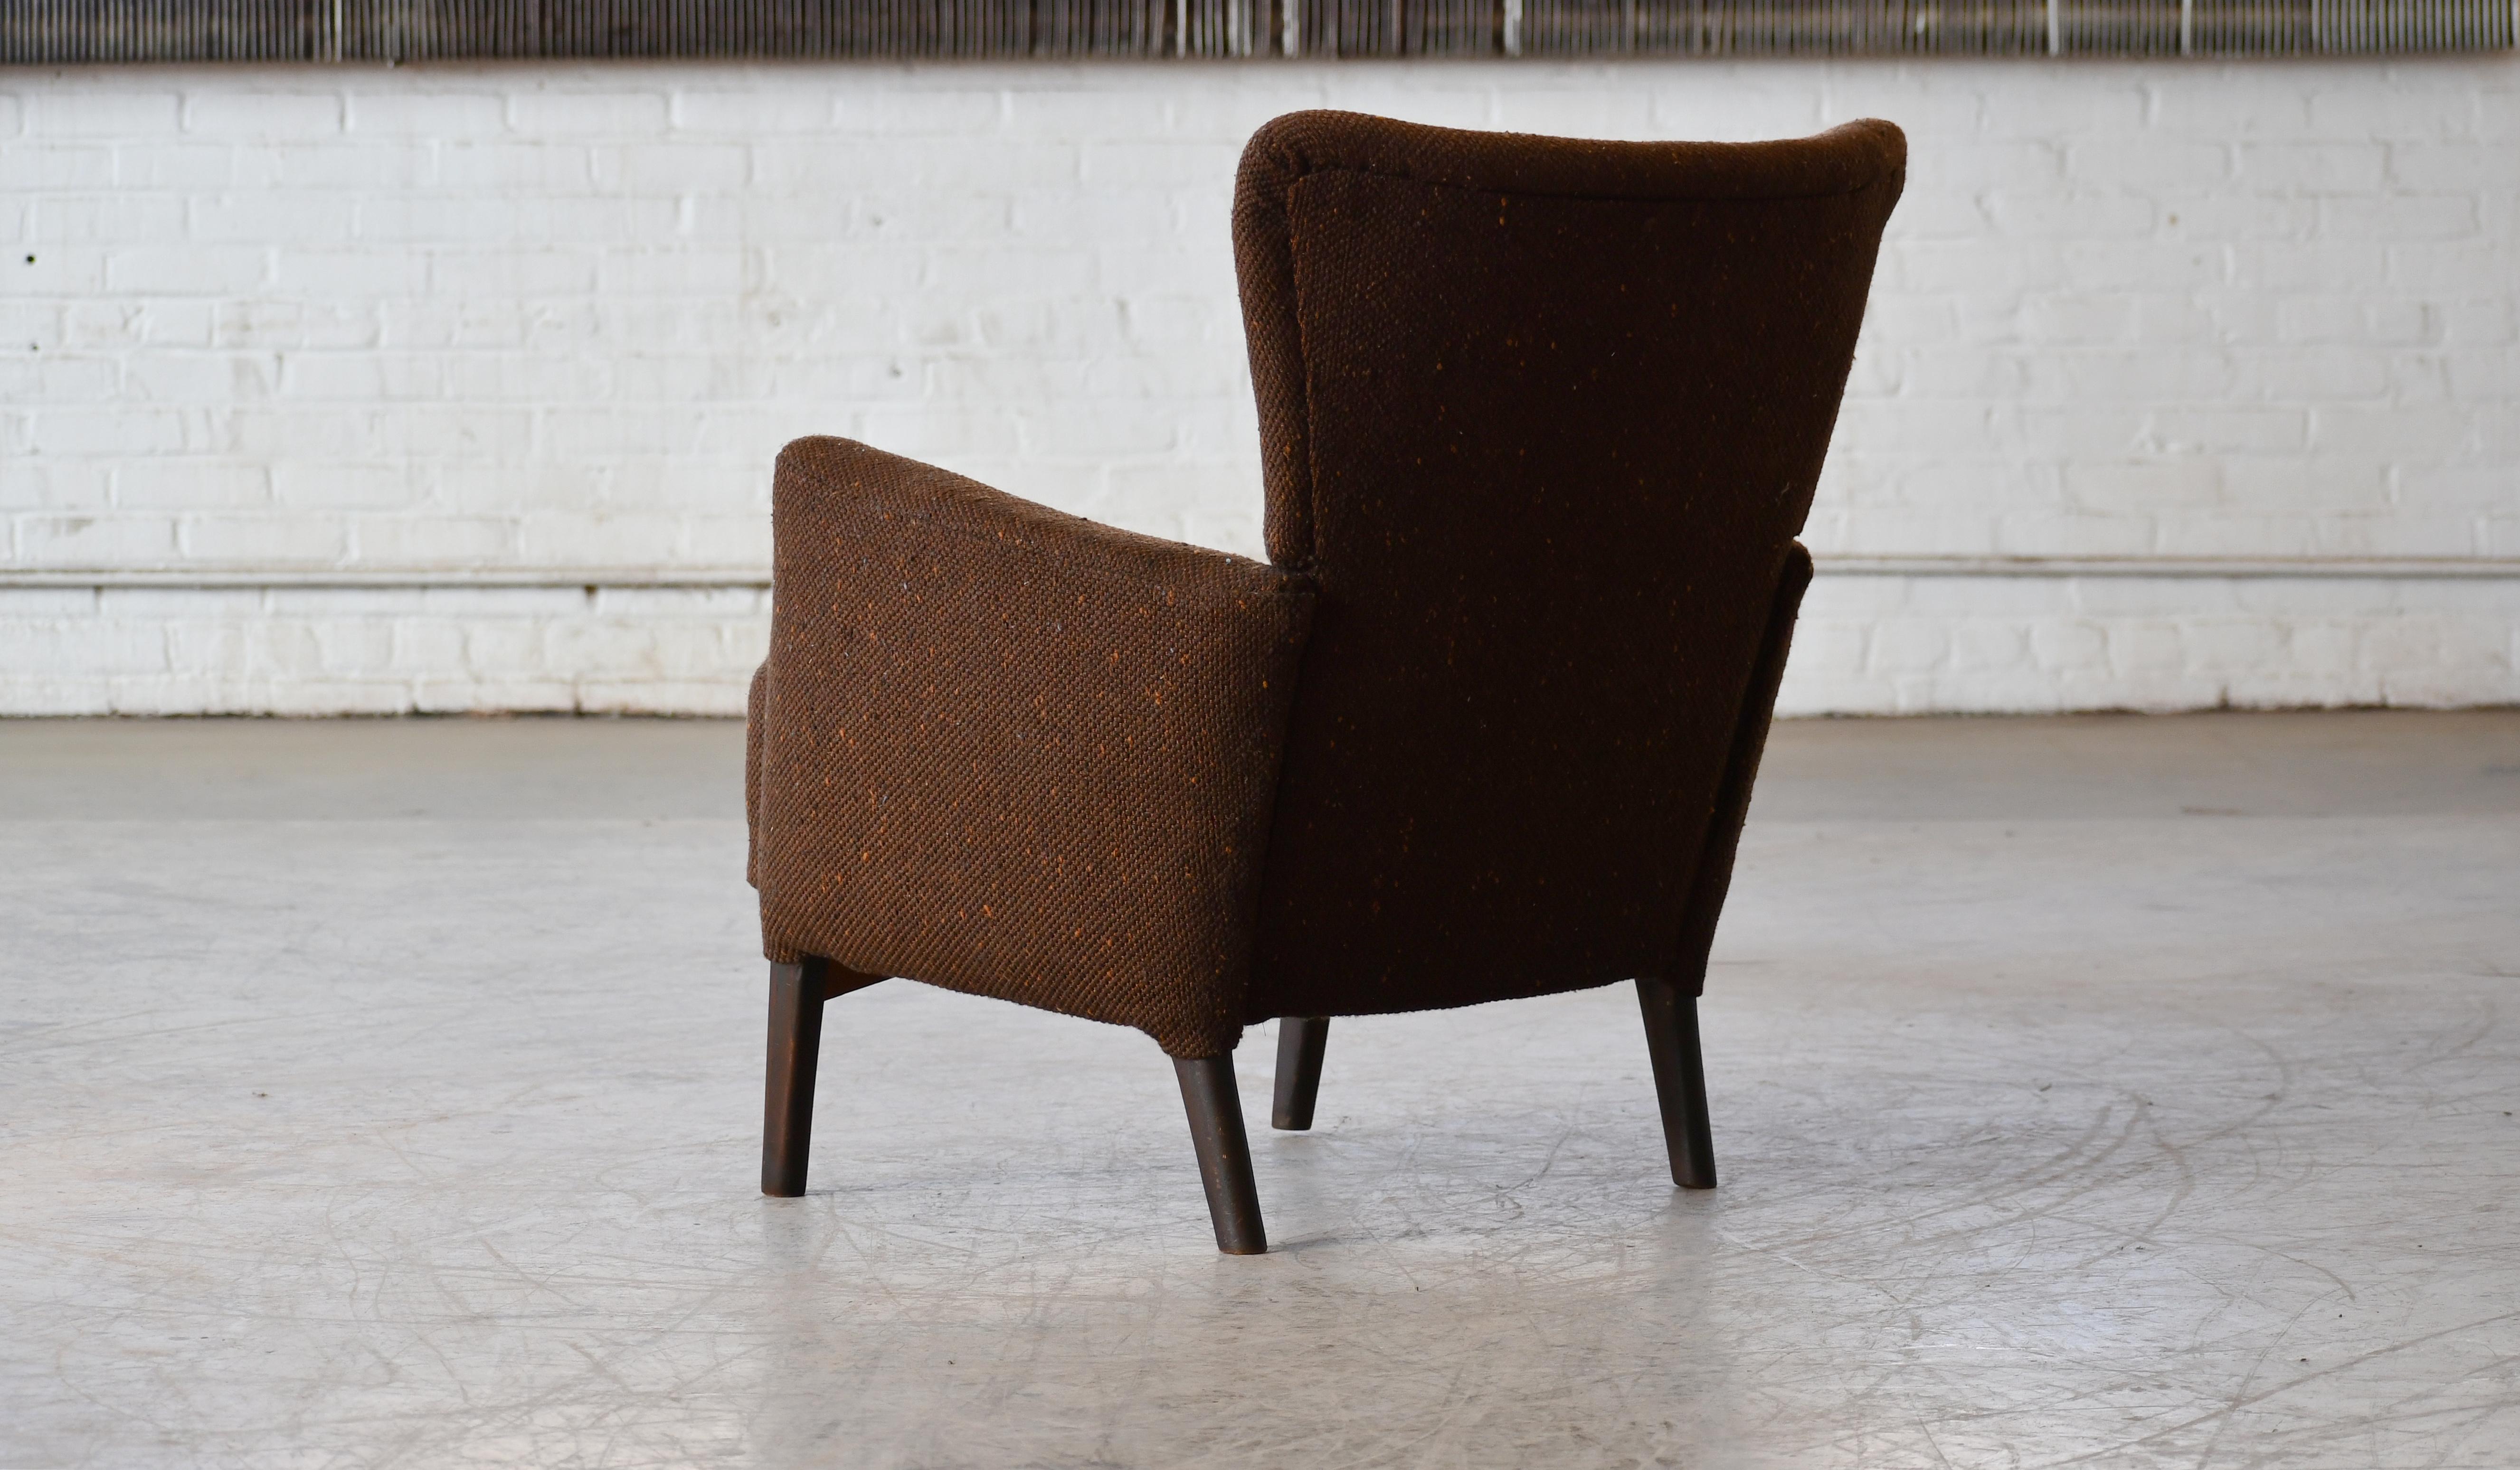 Mid-20th Century Low Back Lounge Chair by Fritz Hansen, Denmark 1950's For Sale